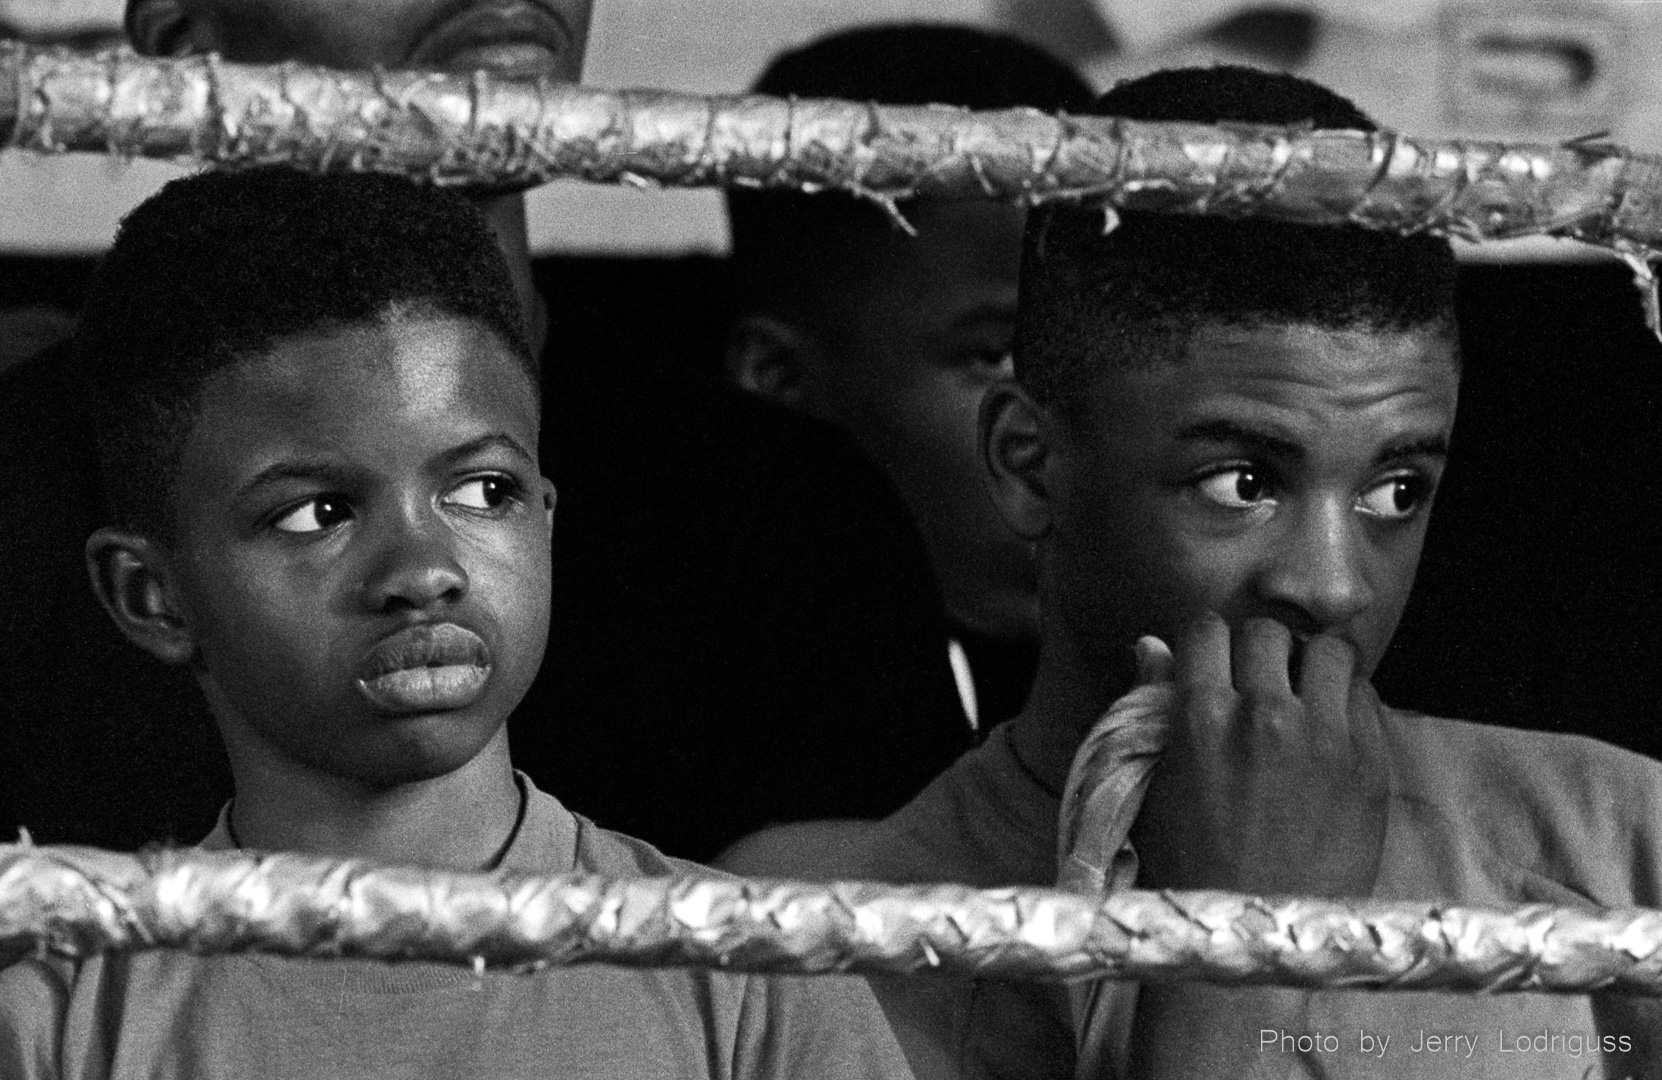 Kids watch boxers work out at Champ's Gym in Philadelphia.